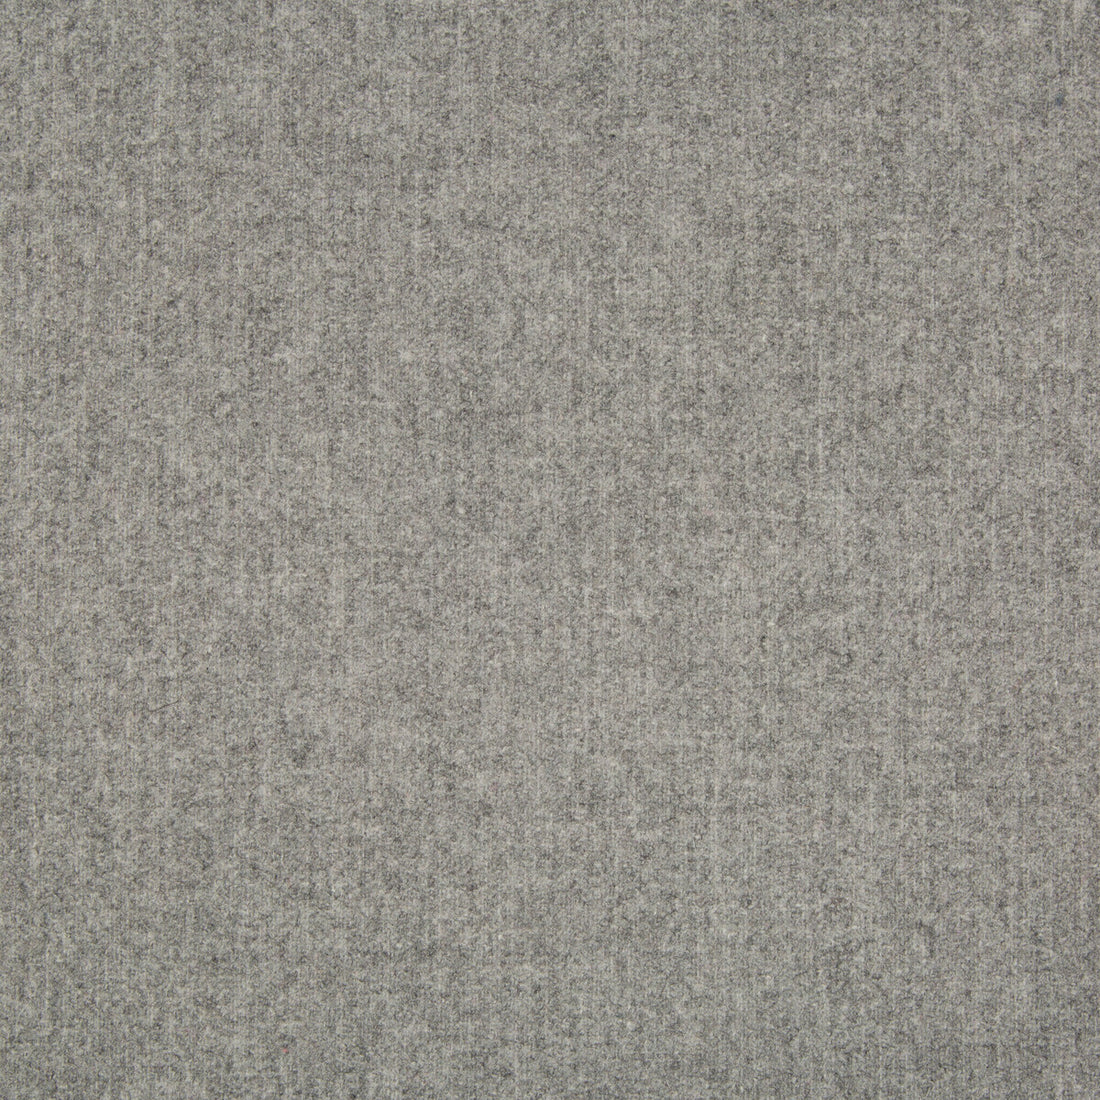 Lucky Suit fabric in smoke color - pattern 34903.11.0 - by Kravet Couture in the Modern Tailor collection